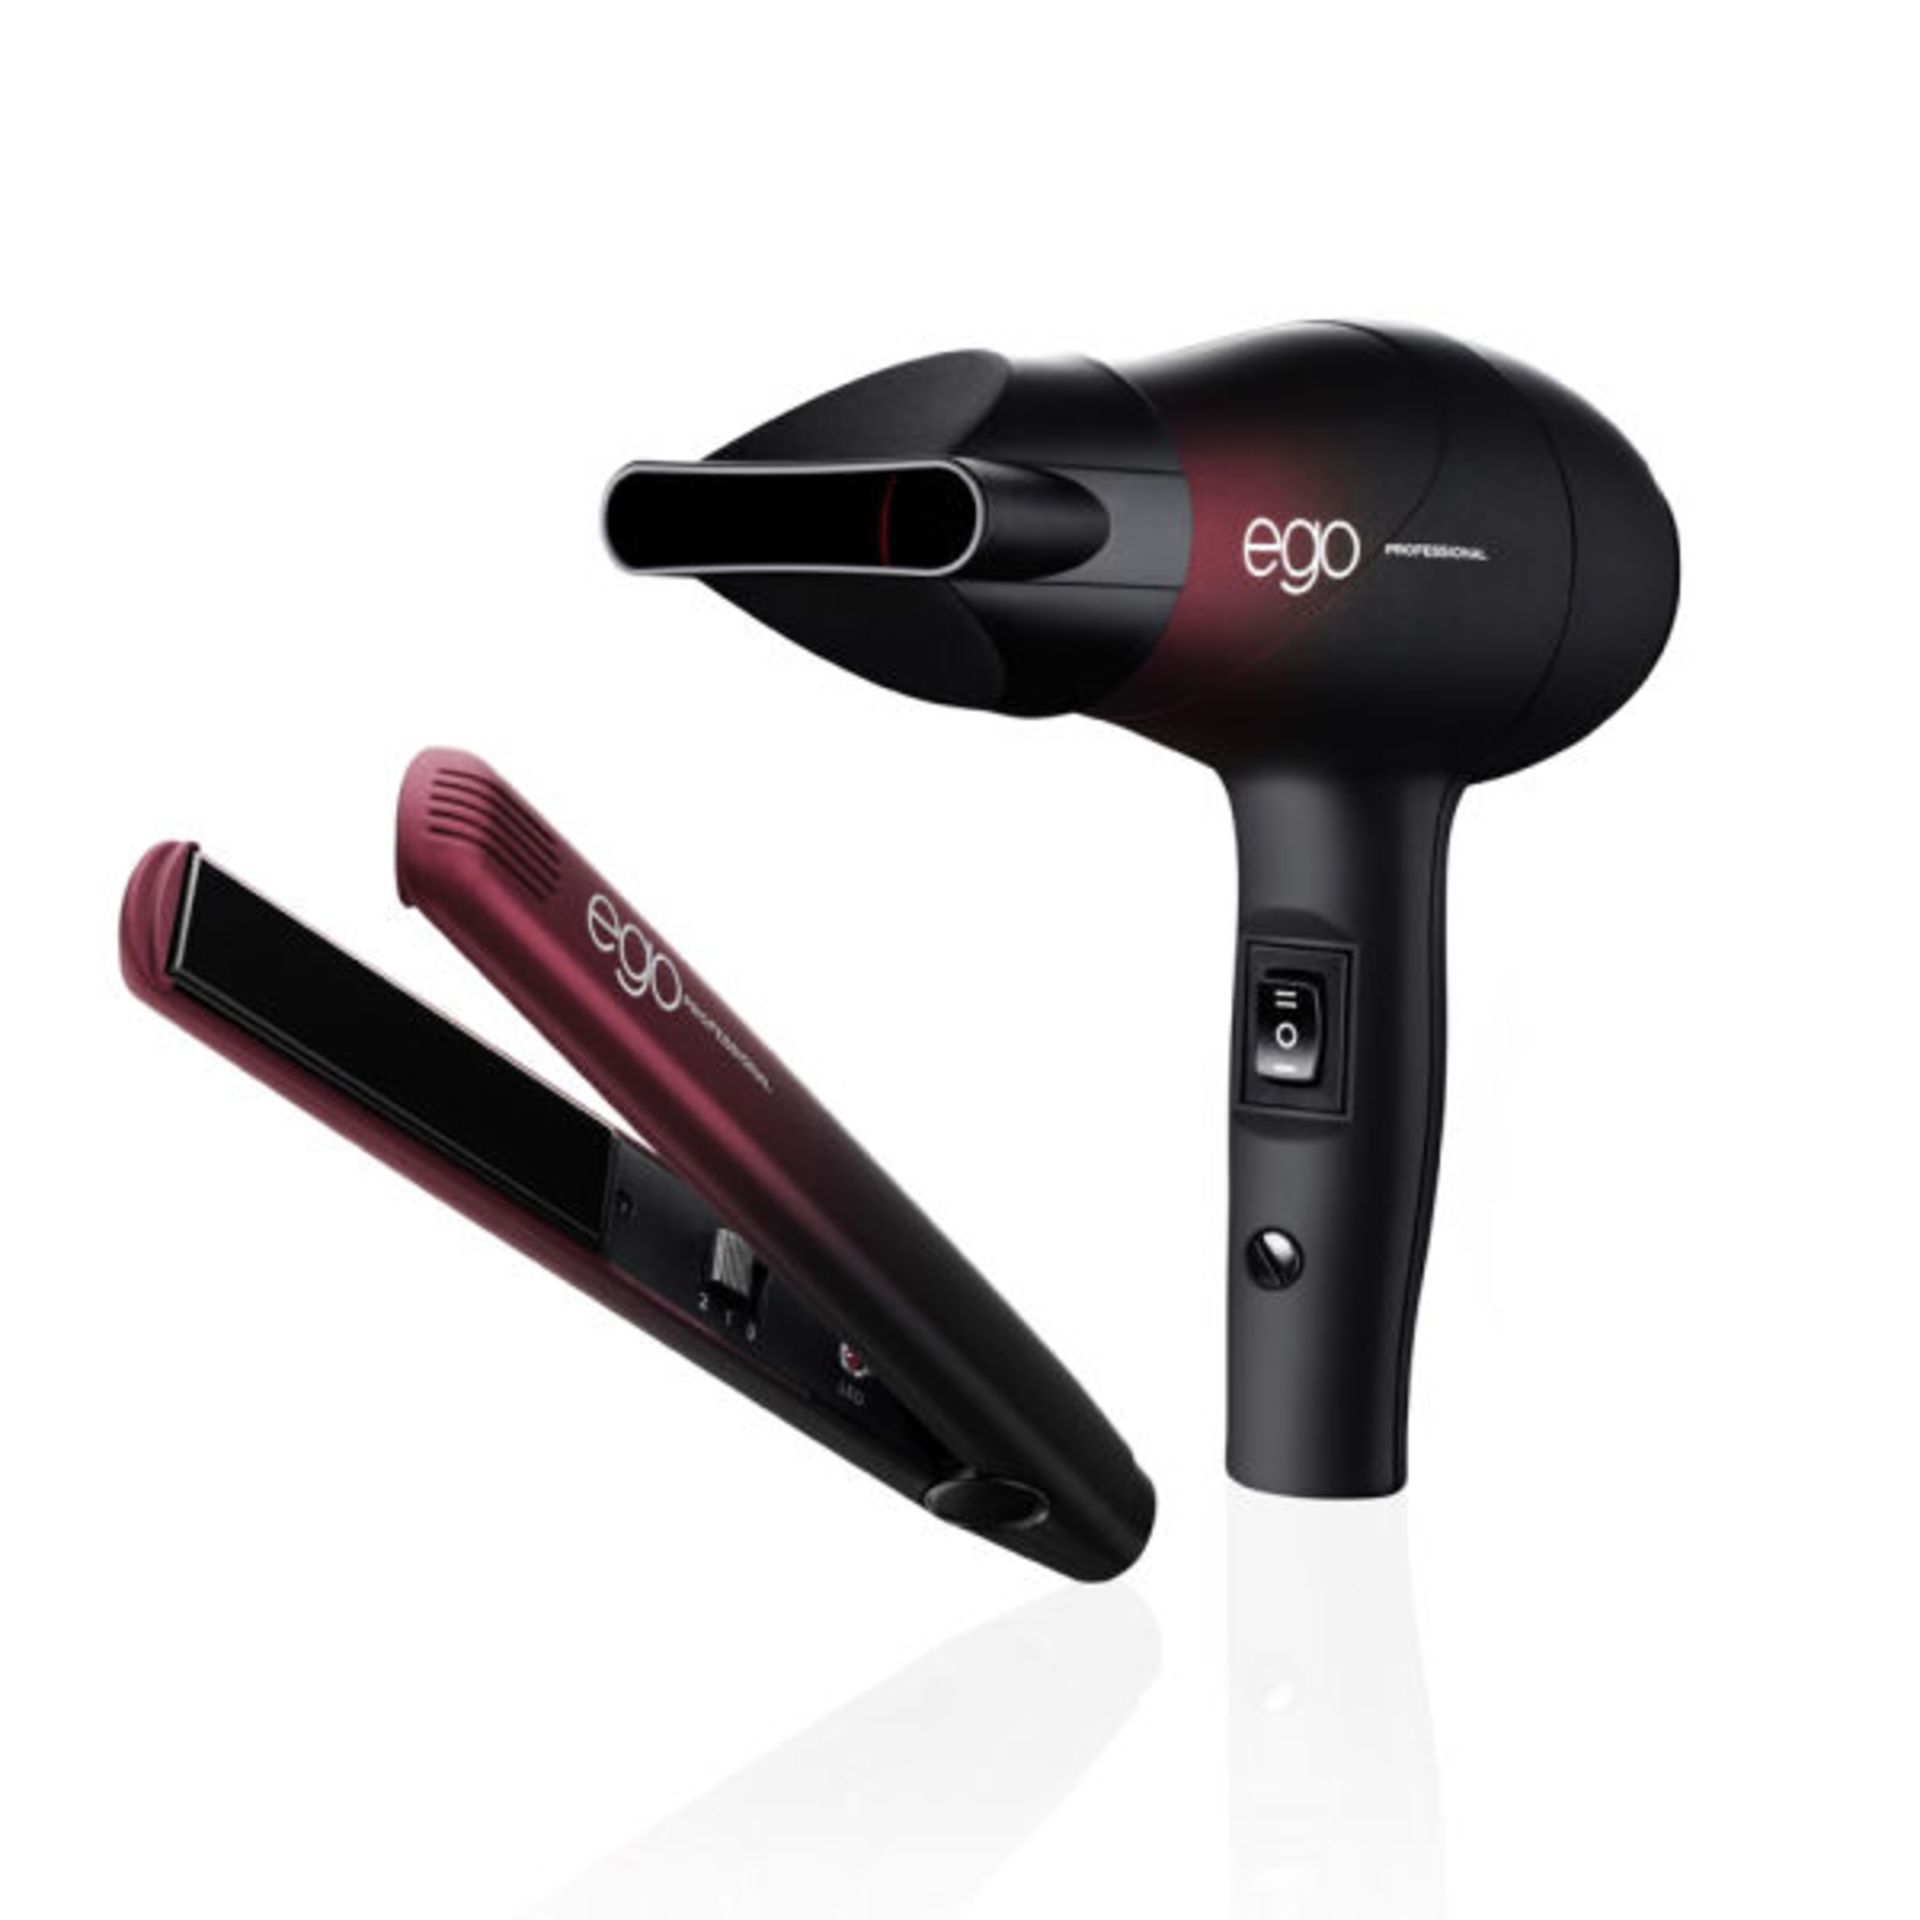 1 x Ego Professional Full On And Fabulous Ego Set (Alter Ego Hairdryer And Little Iron) [Grade B]